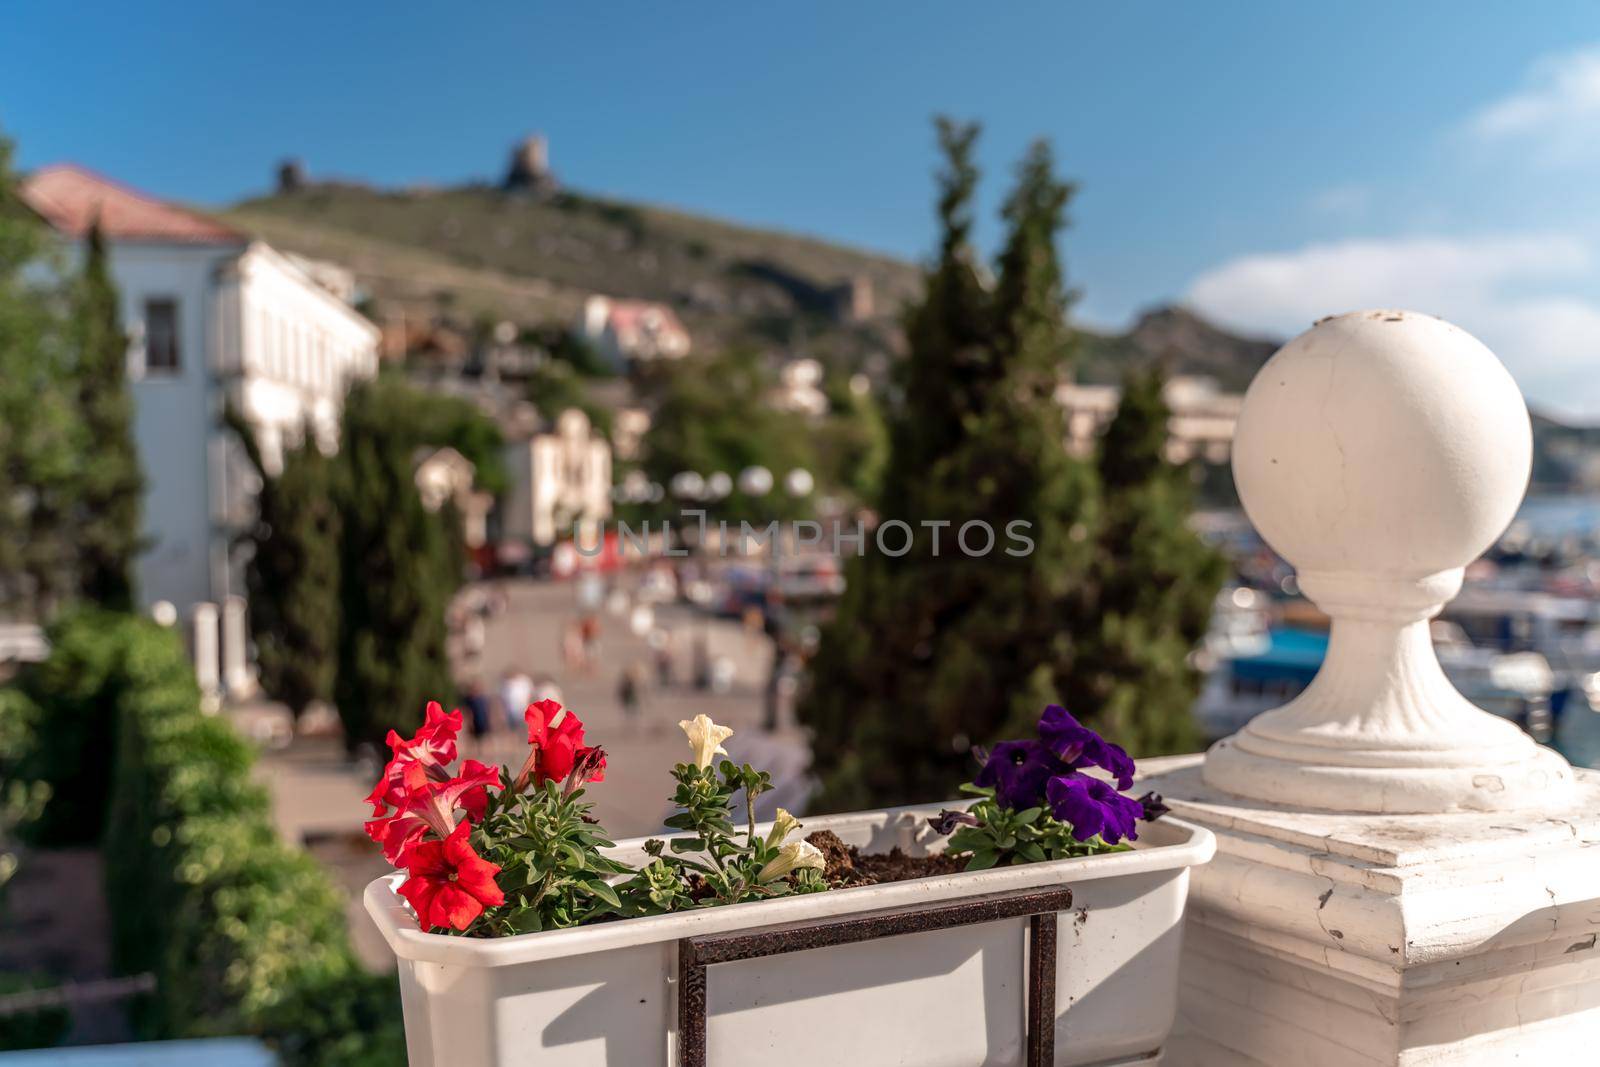 A beautiful view through the bright flowers of petunias to the sea bay with yachts. Turquoise sea against the backdrop of mountains and a clear blue sky